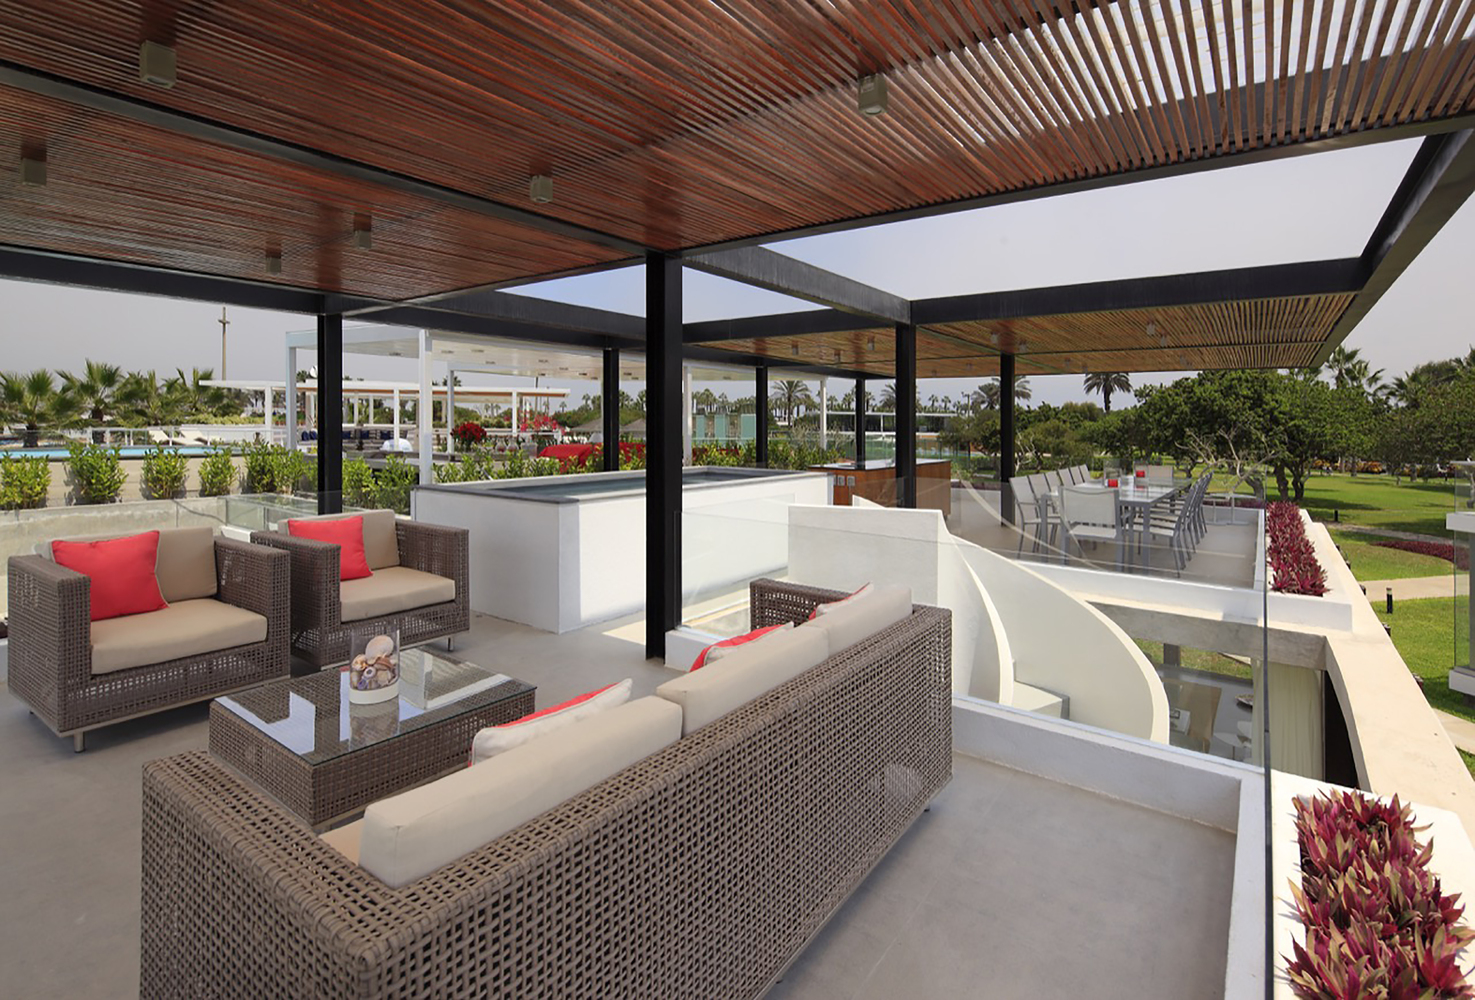 There's a lot of outdoor space for family and friends to enjoy.